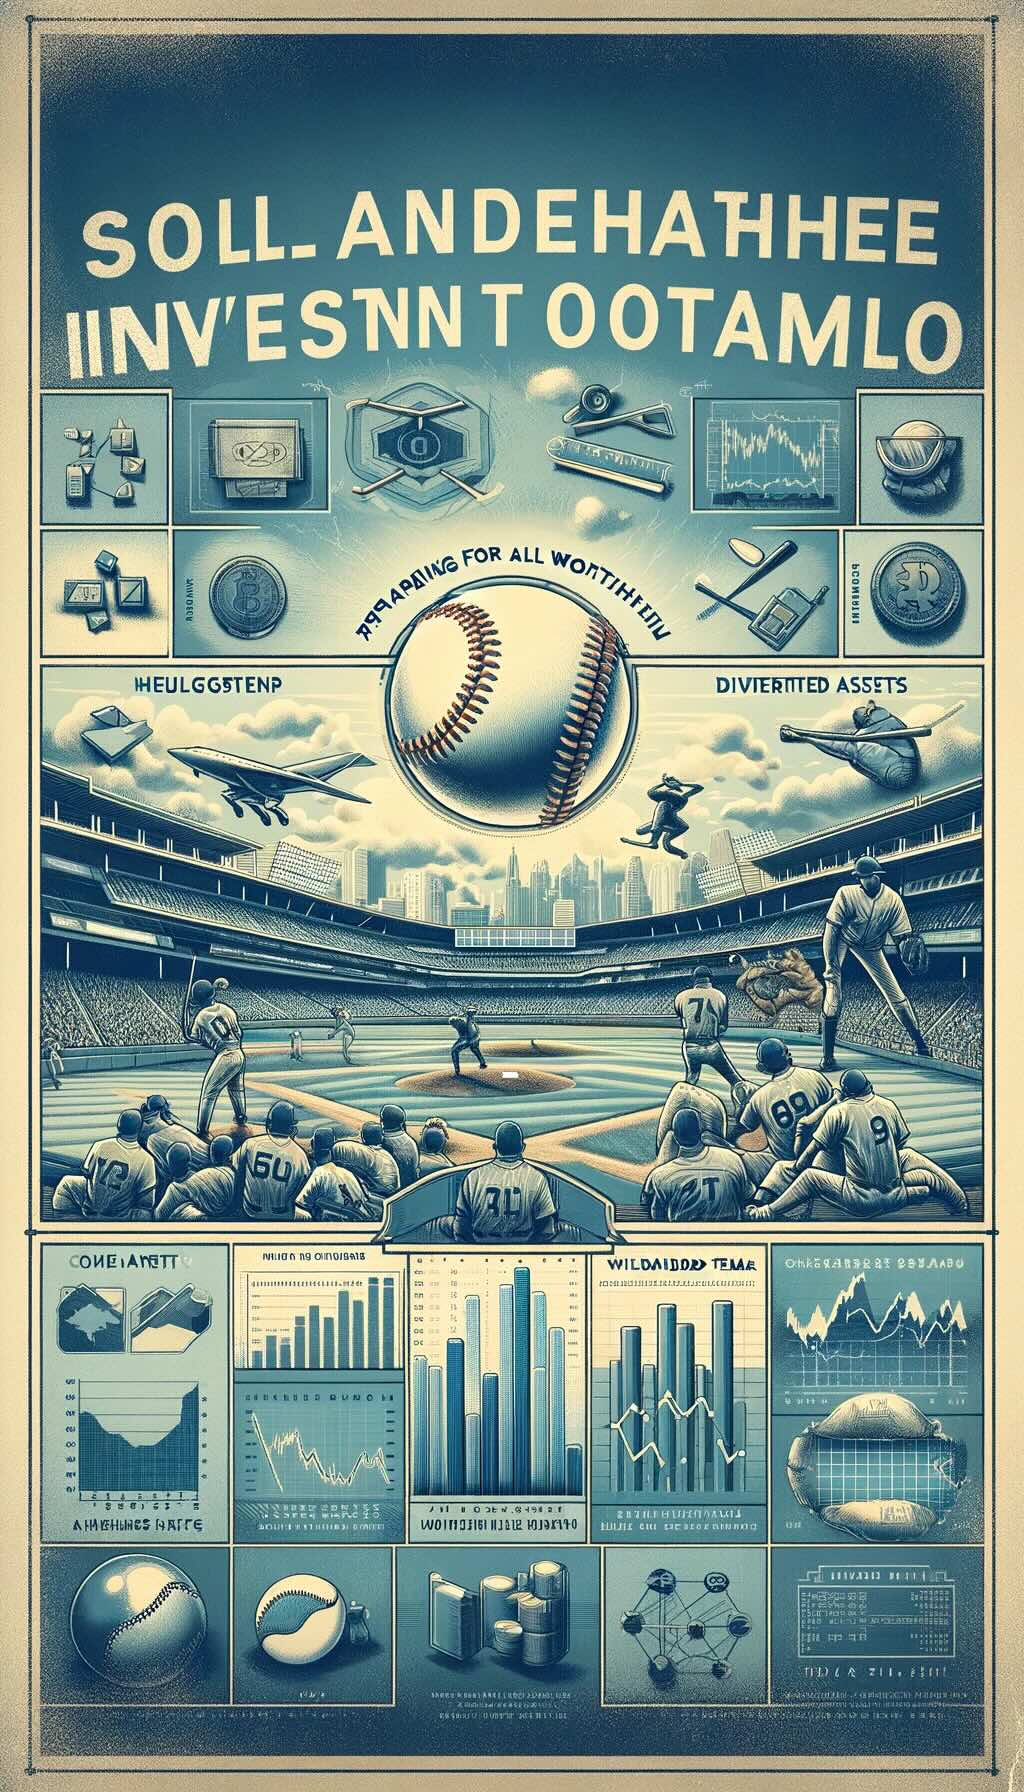 The concept of an all-weather investment portfolio compared to a well-rounded baseball team. The artwork merges imagery of both baseball and investment, symbolizing the strength and resilience required in both fields.